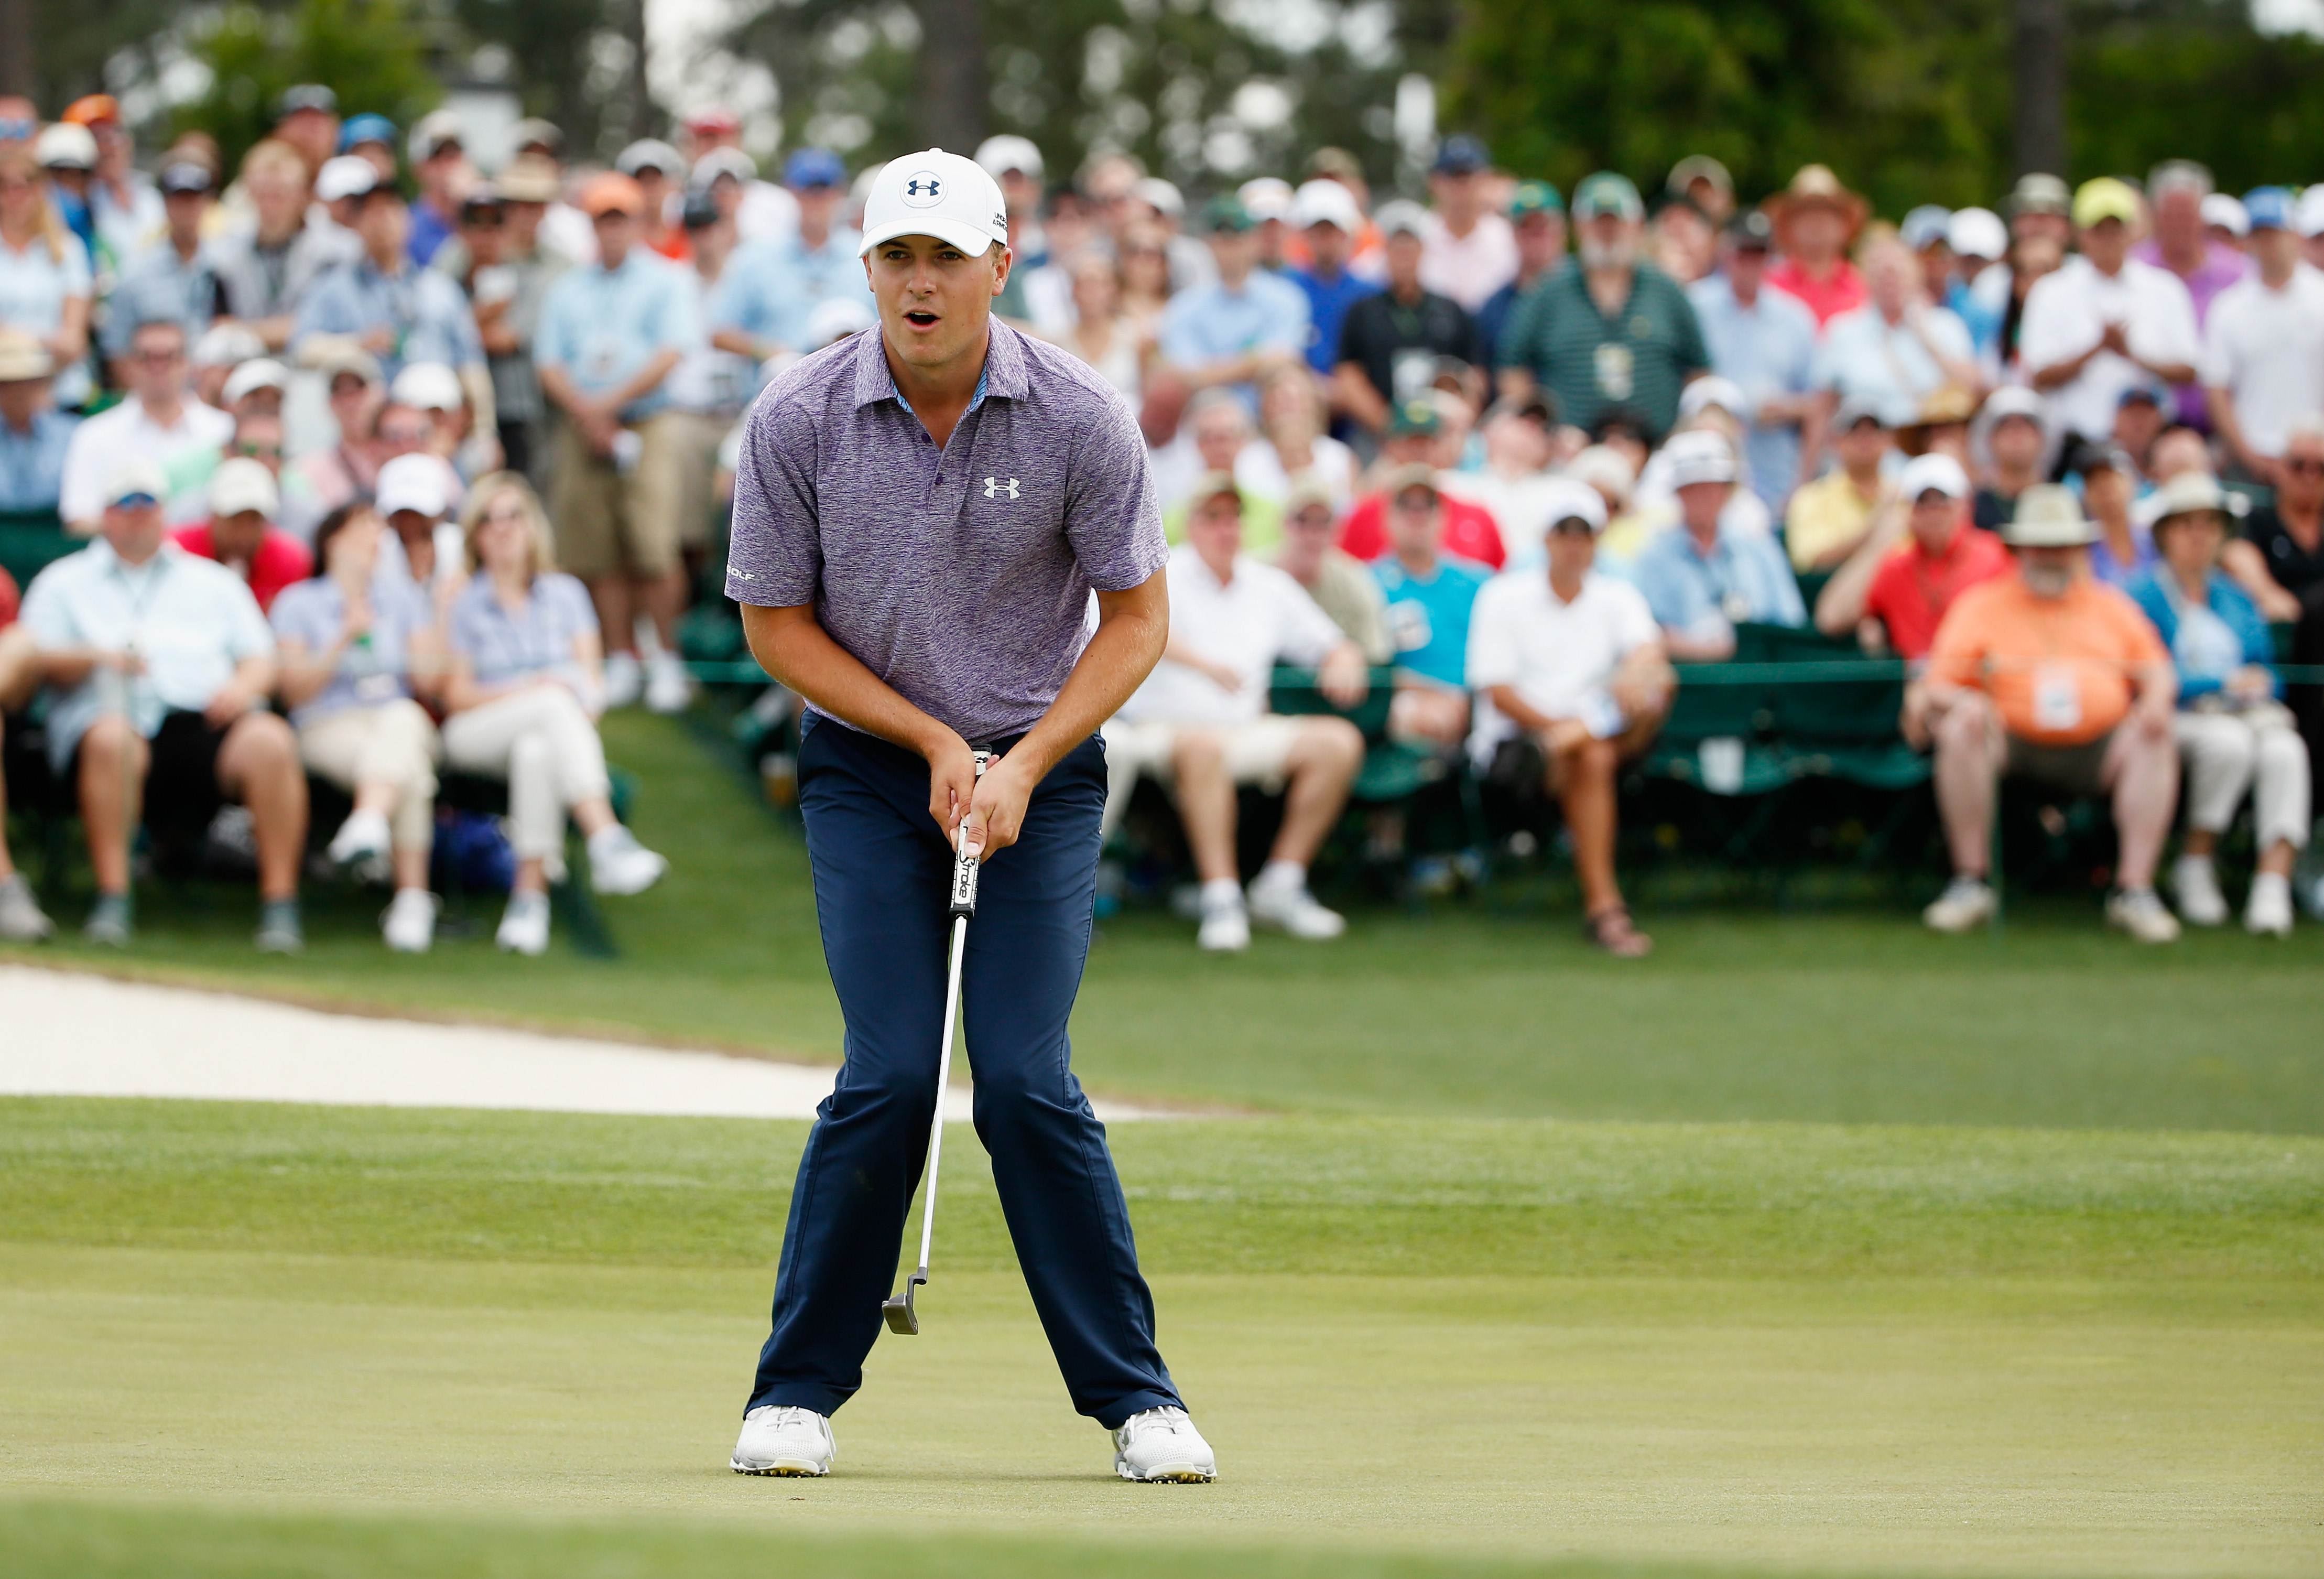 Jordan Spieth just misses a birdie putt on the 18th green during his second-round 66 at the Masters at Augusta National Golf Club. Photo: AFP